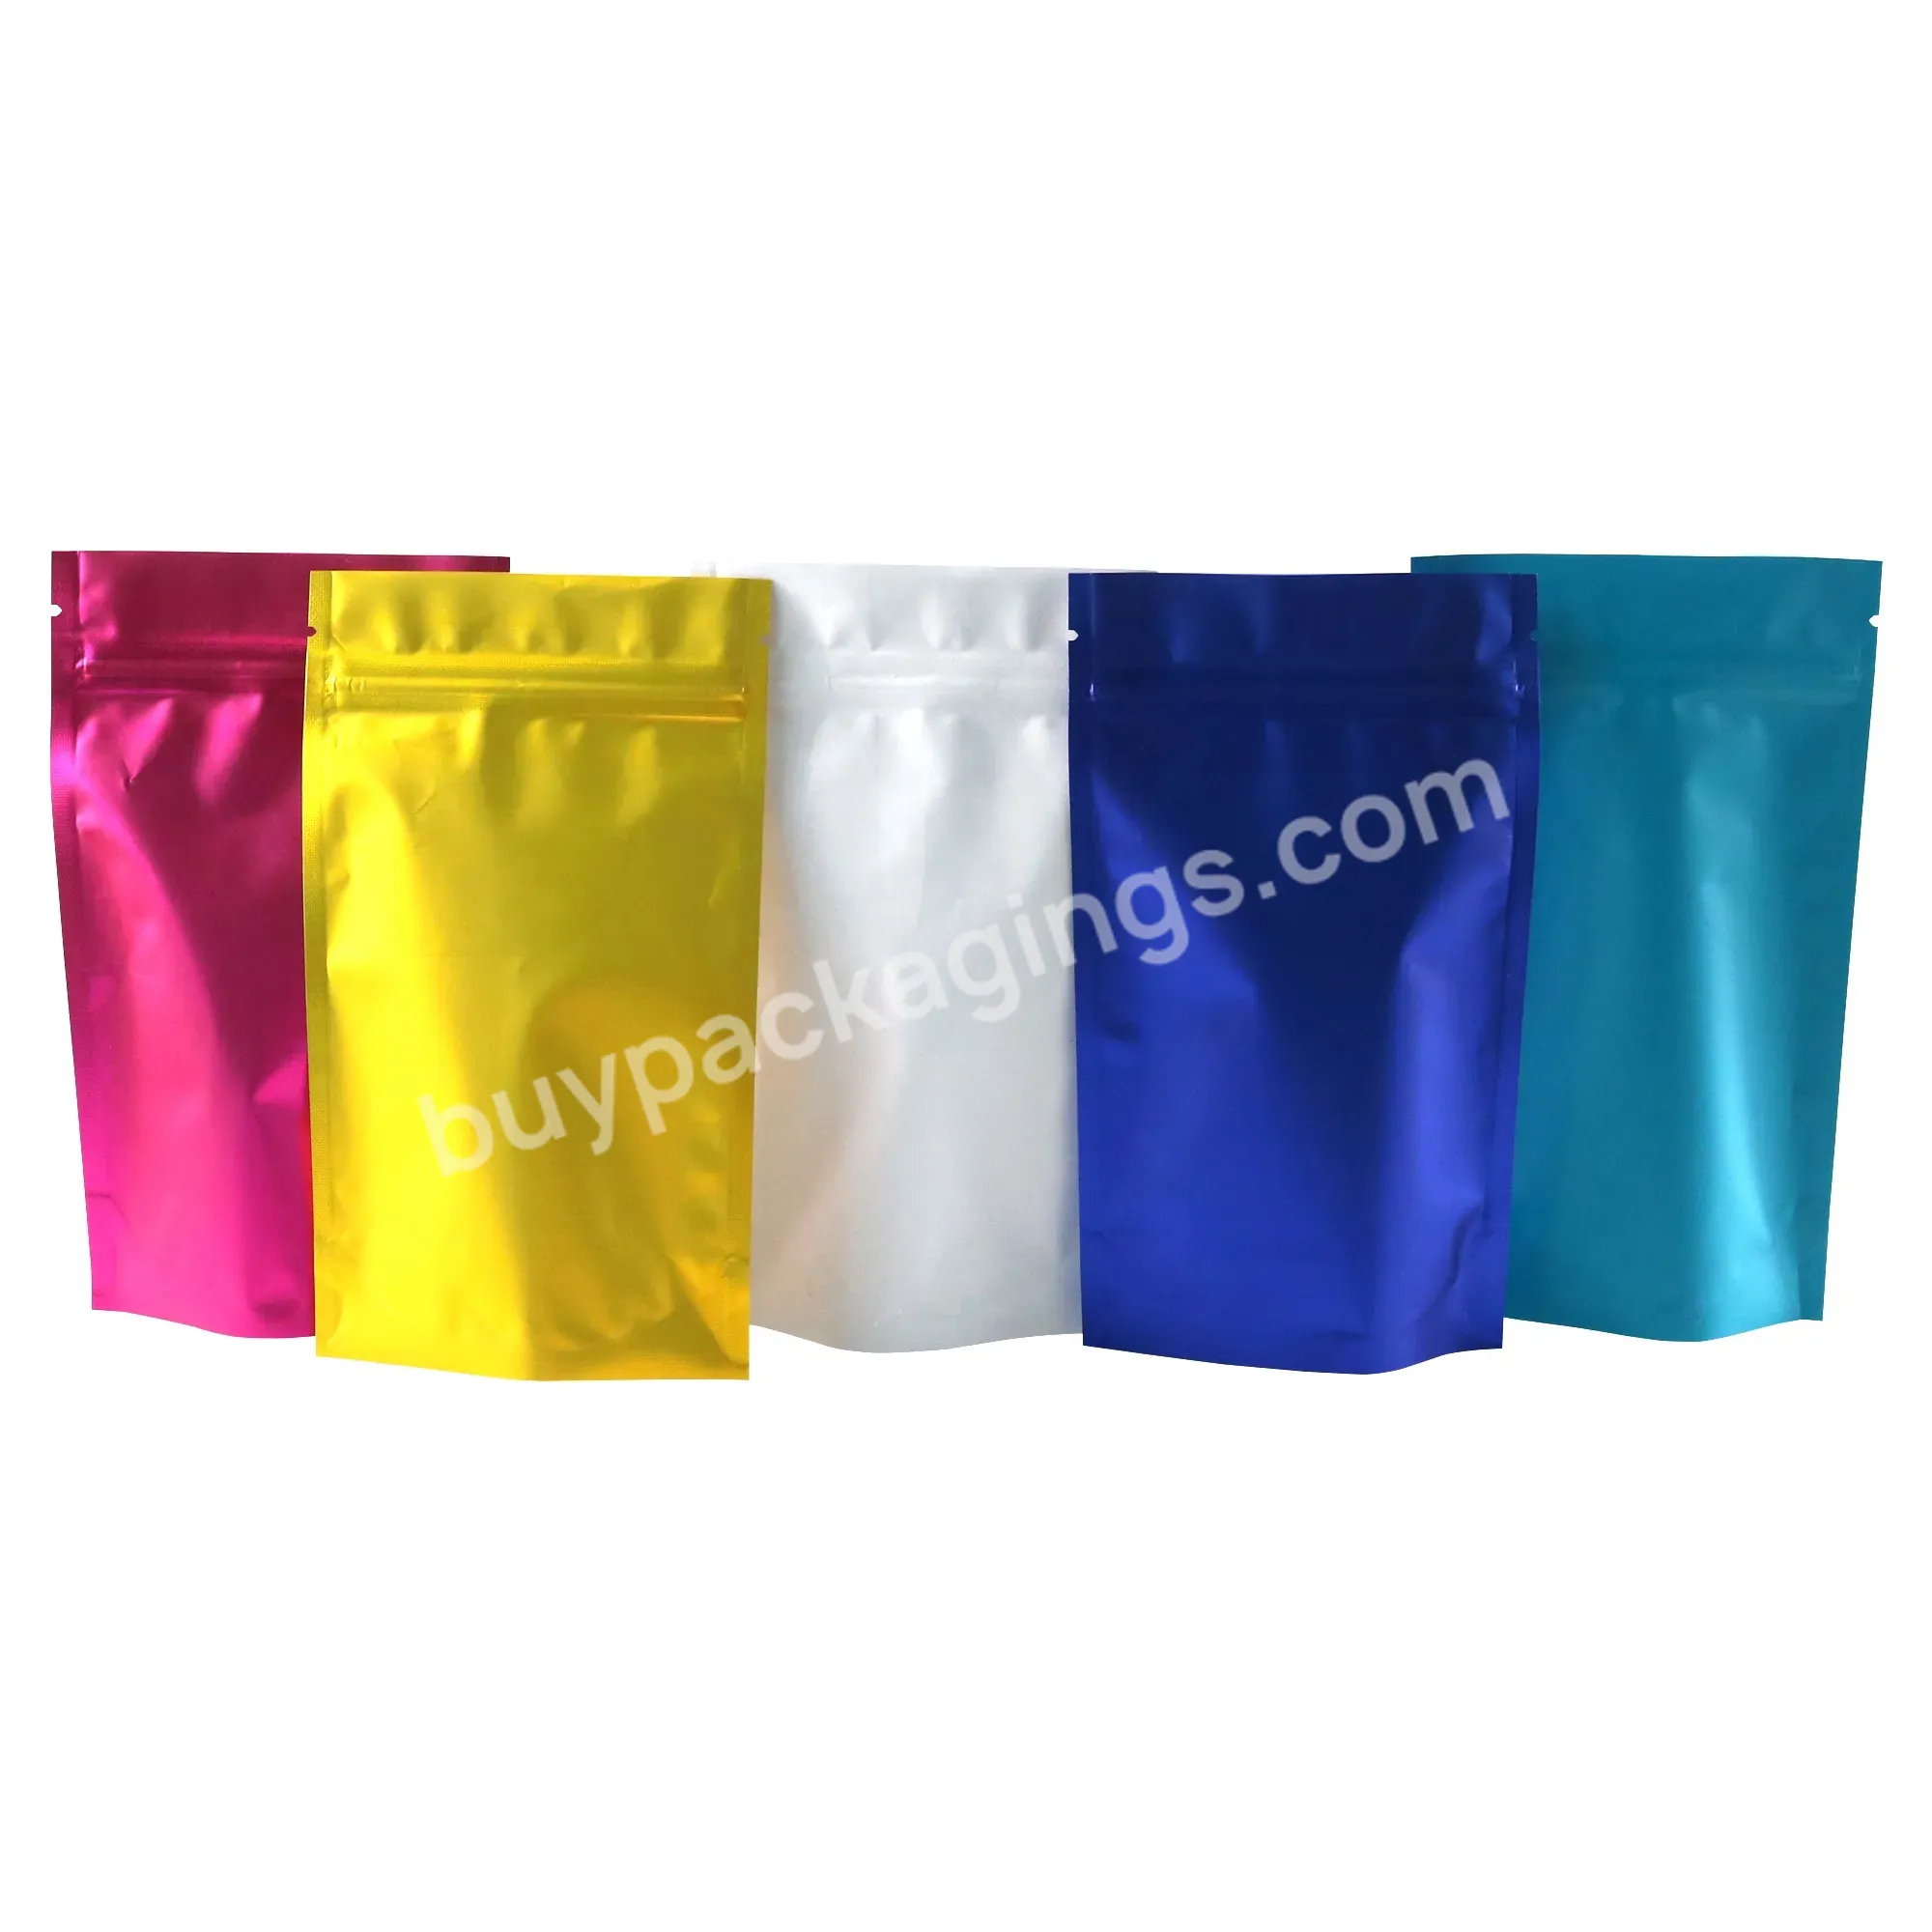 Holographic Aluminum Zipper Bags Smell Proof Packaging Zip Lock Bag With Transparent 3.5g Mylar Bag